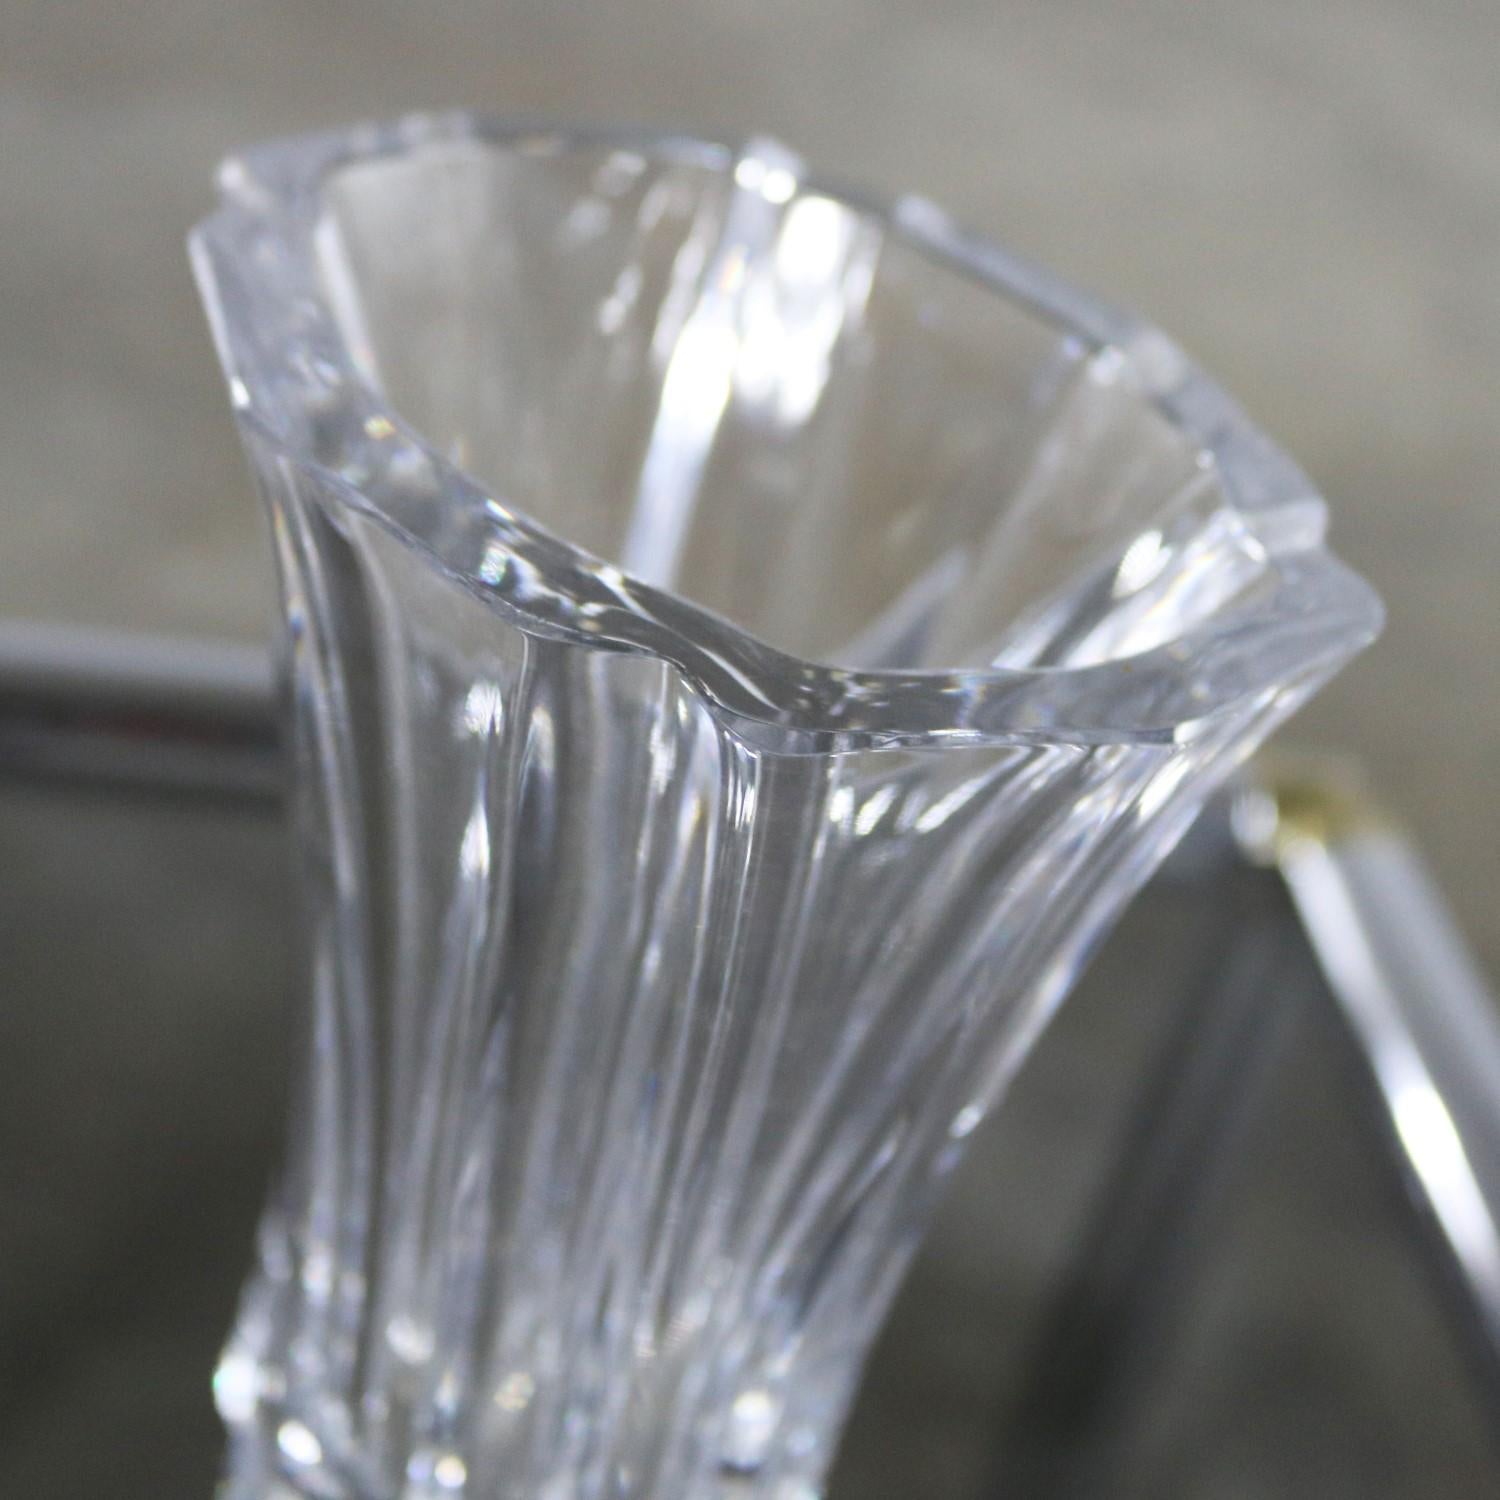 Orrefors Crystal Vase by Lars Hellsten Signed and Numbered LH 4599-22 7